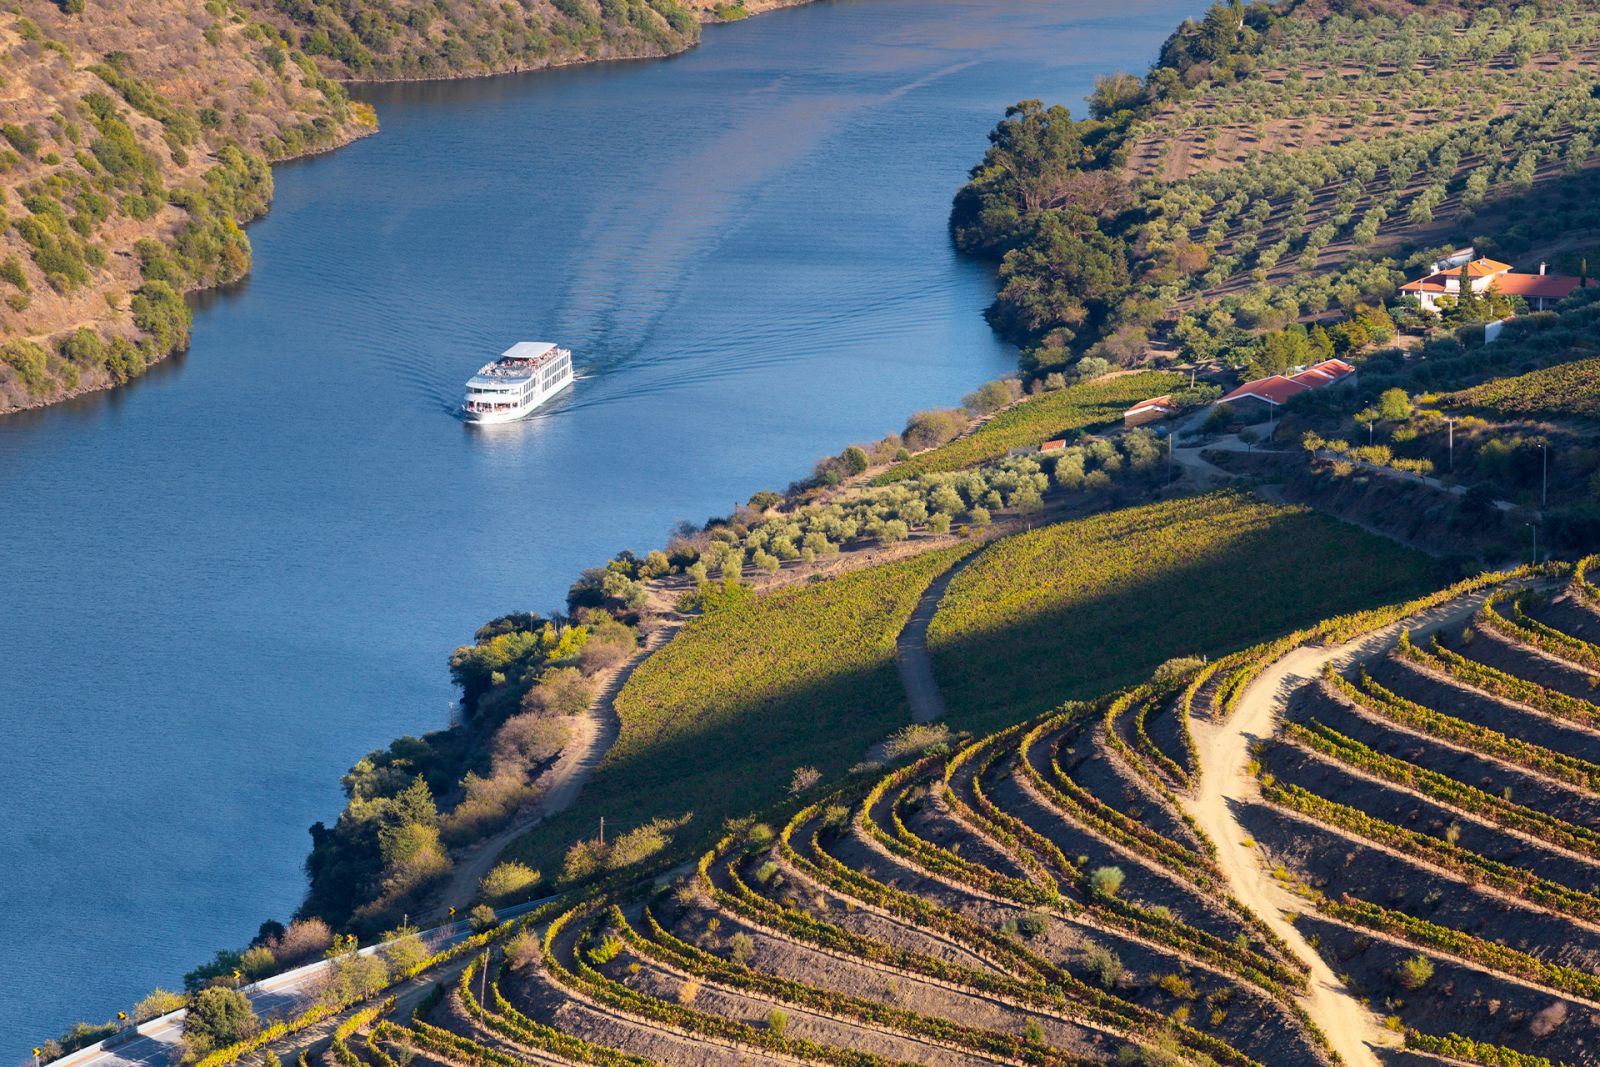 Sun drenched hills in the Douro area.